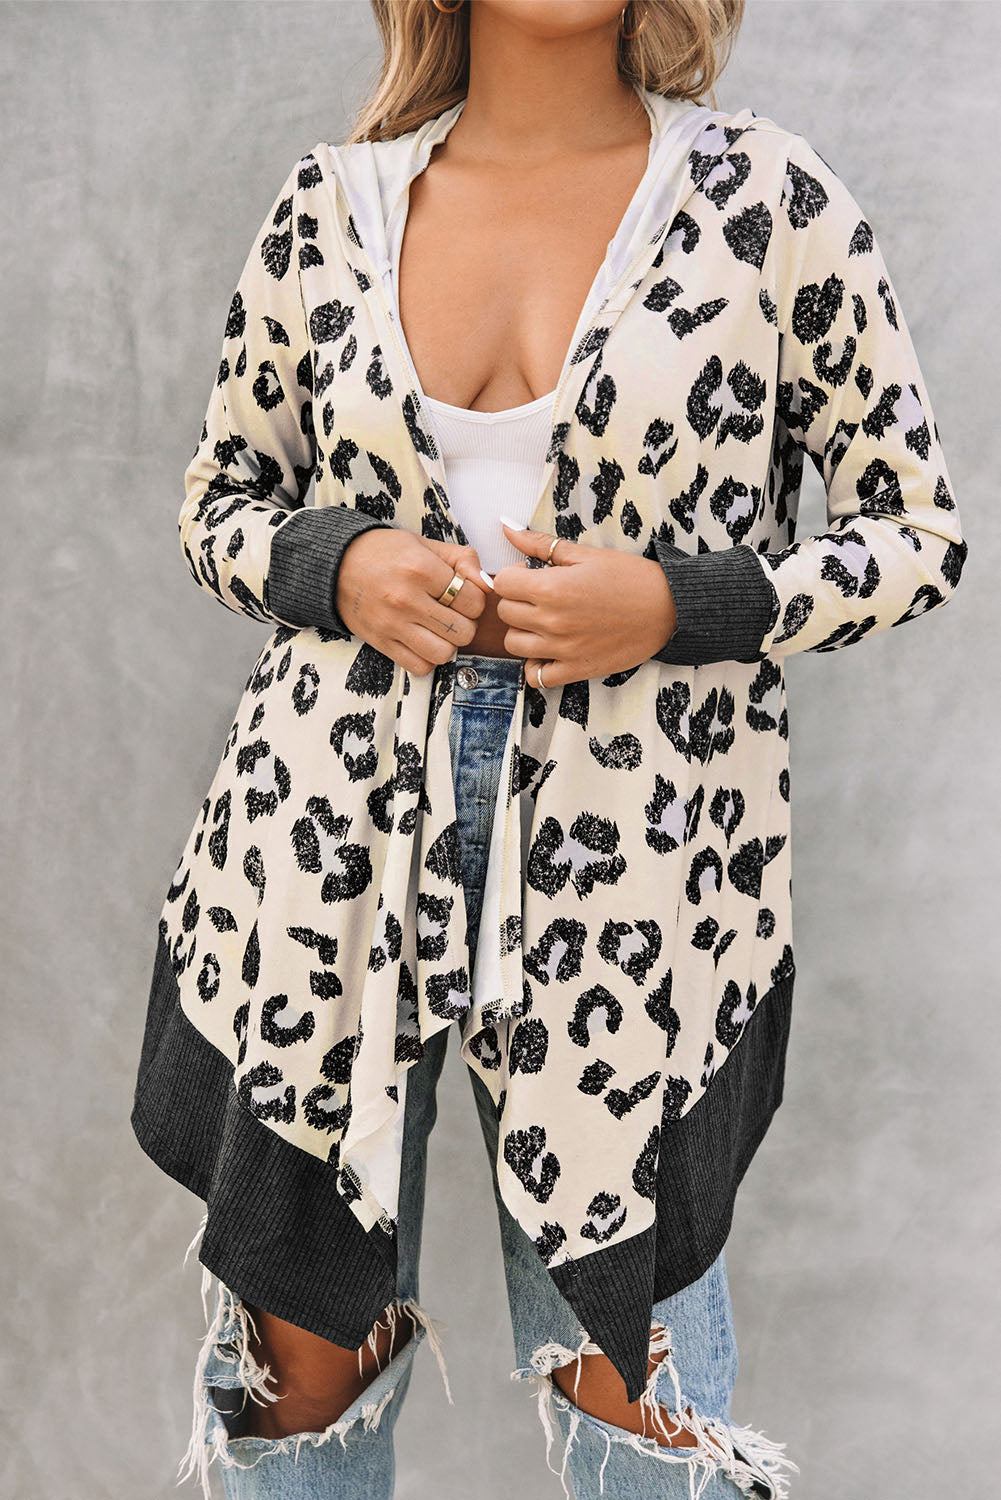 Cheetah Print Casual Hooded Open Front Cardigan